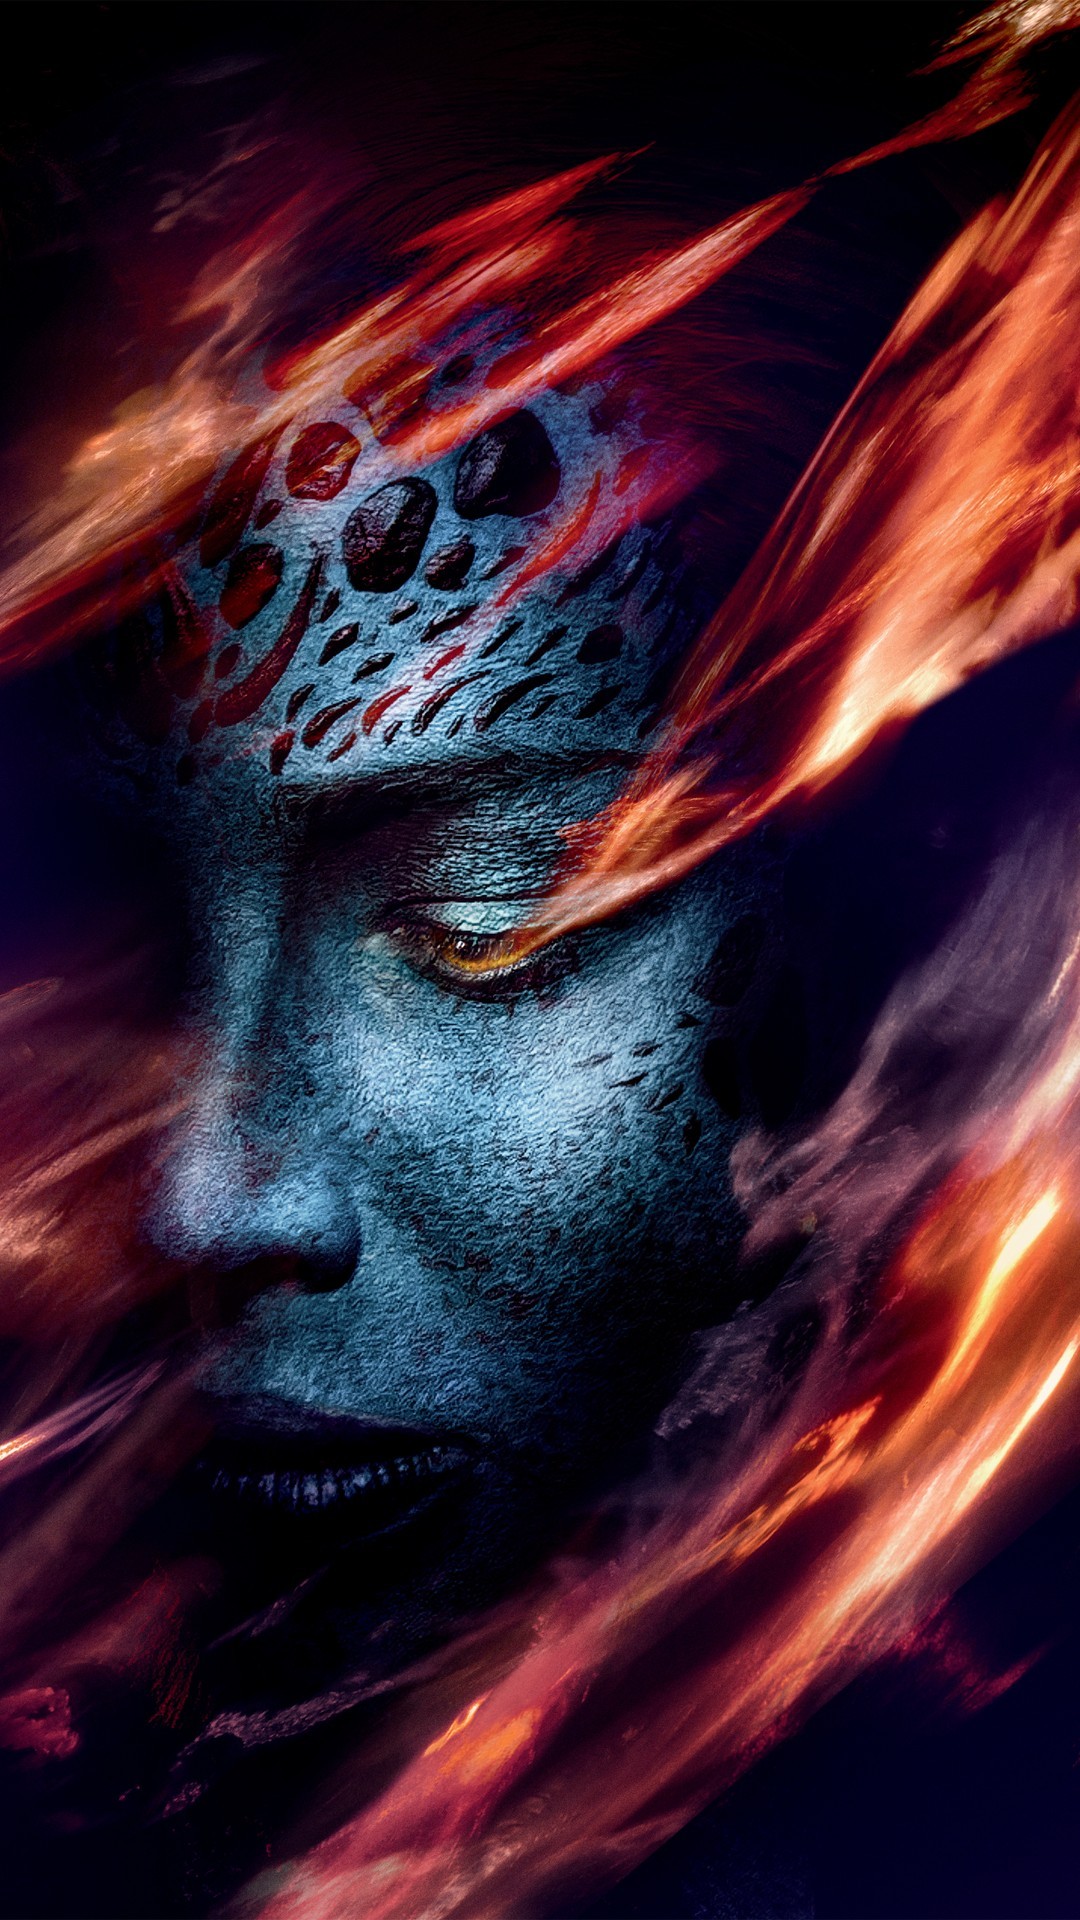 Dark Phoenix Cell Phones Wallpaper with high-resolution 1080x1920 pixel. Download all Mobile Wallpapers and Use them as wallpapers for your iPhone, Tablet, iPad, Android and other mobile devices